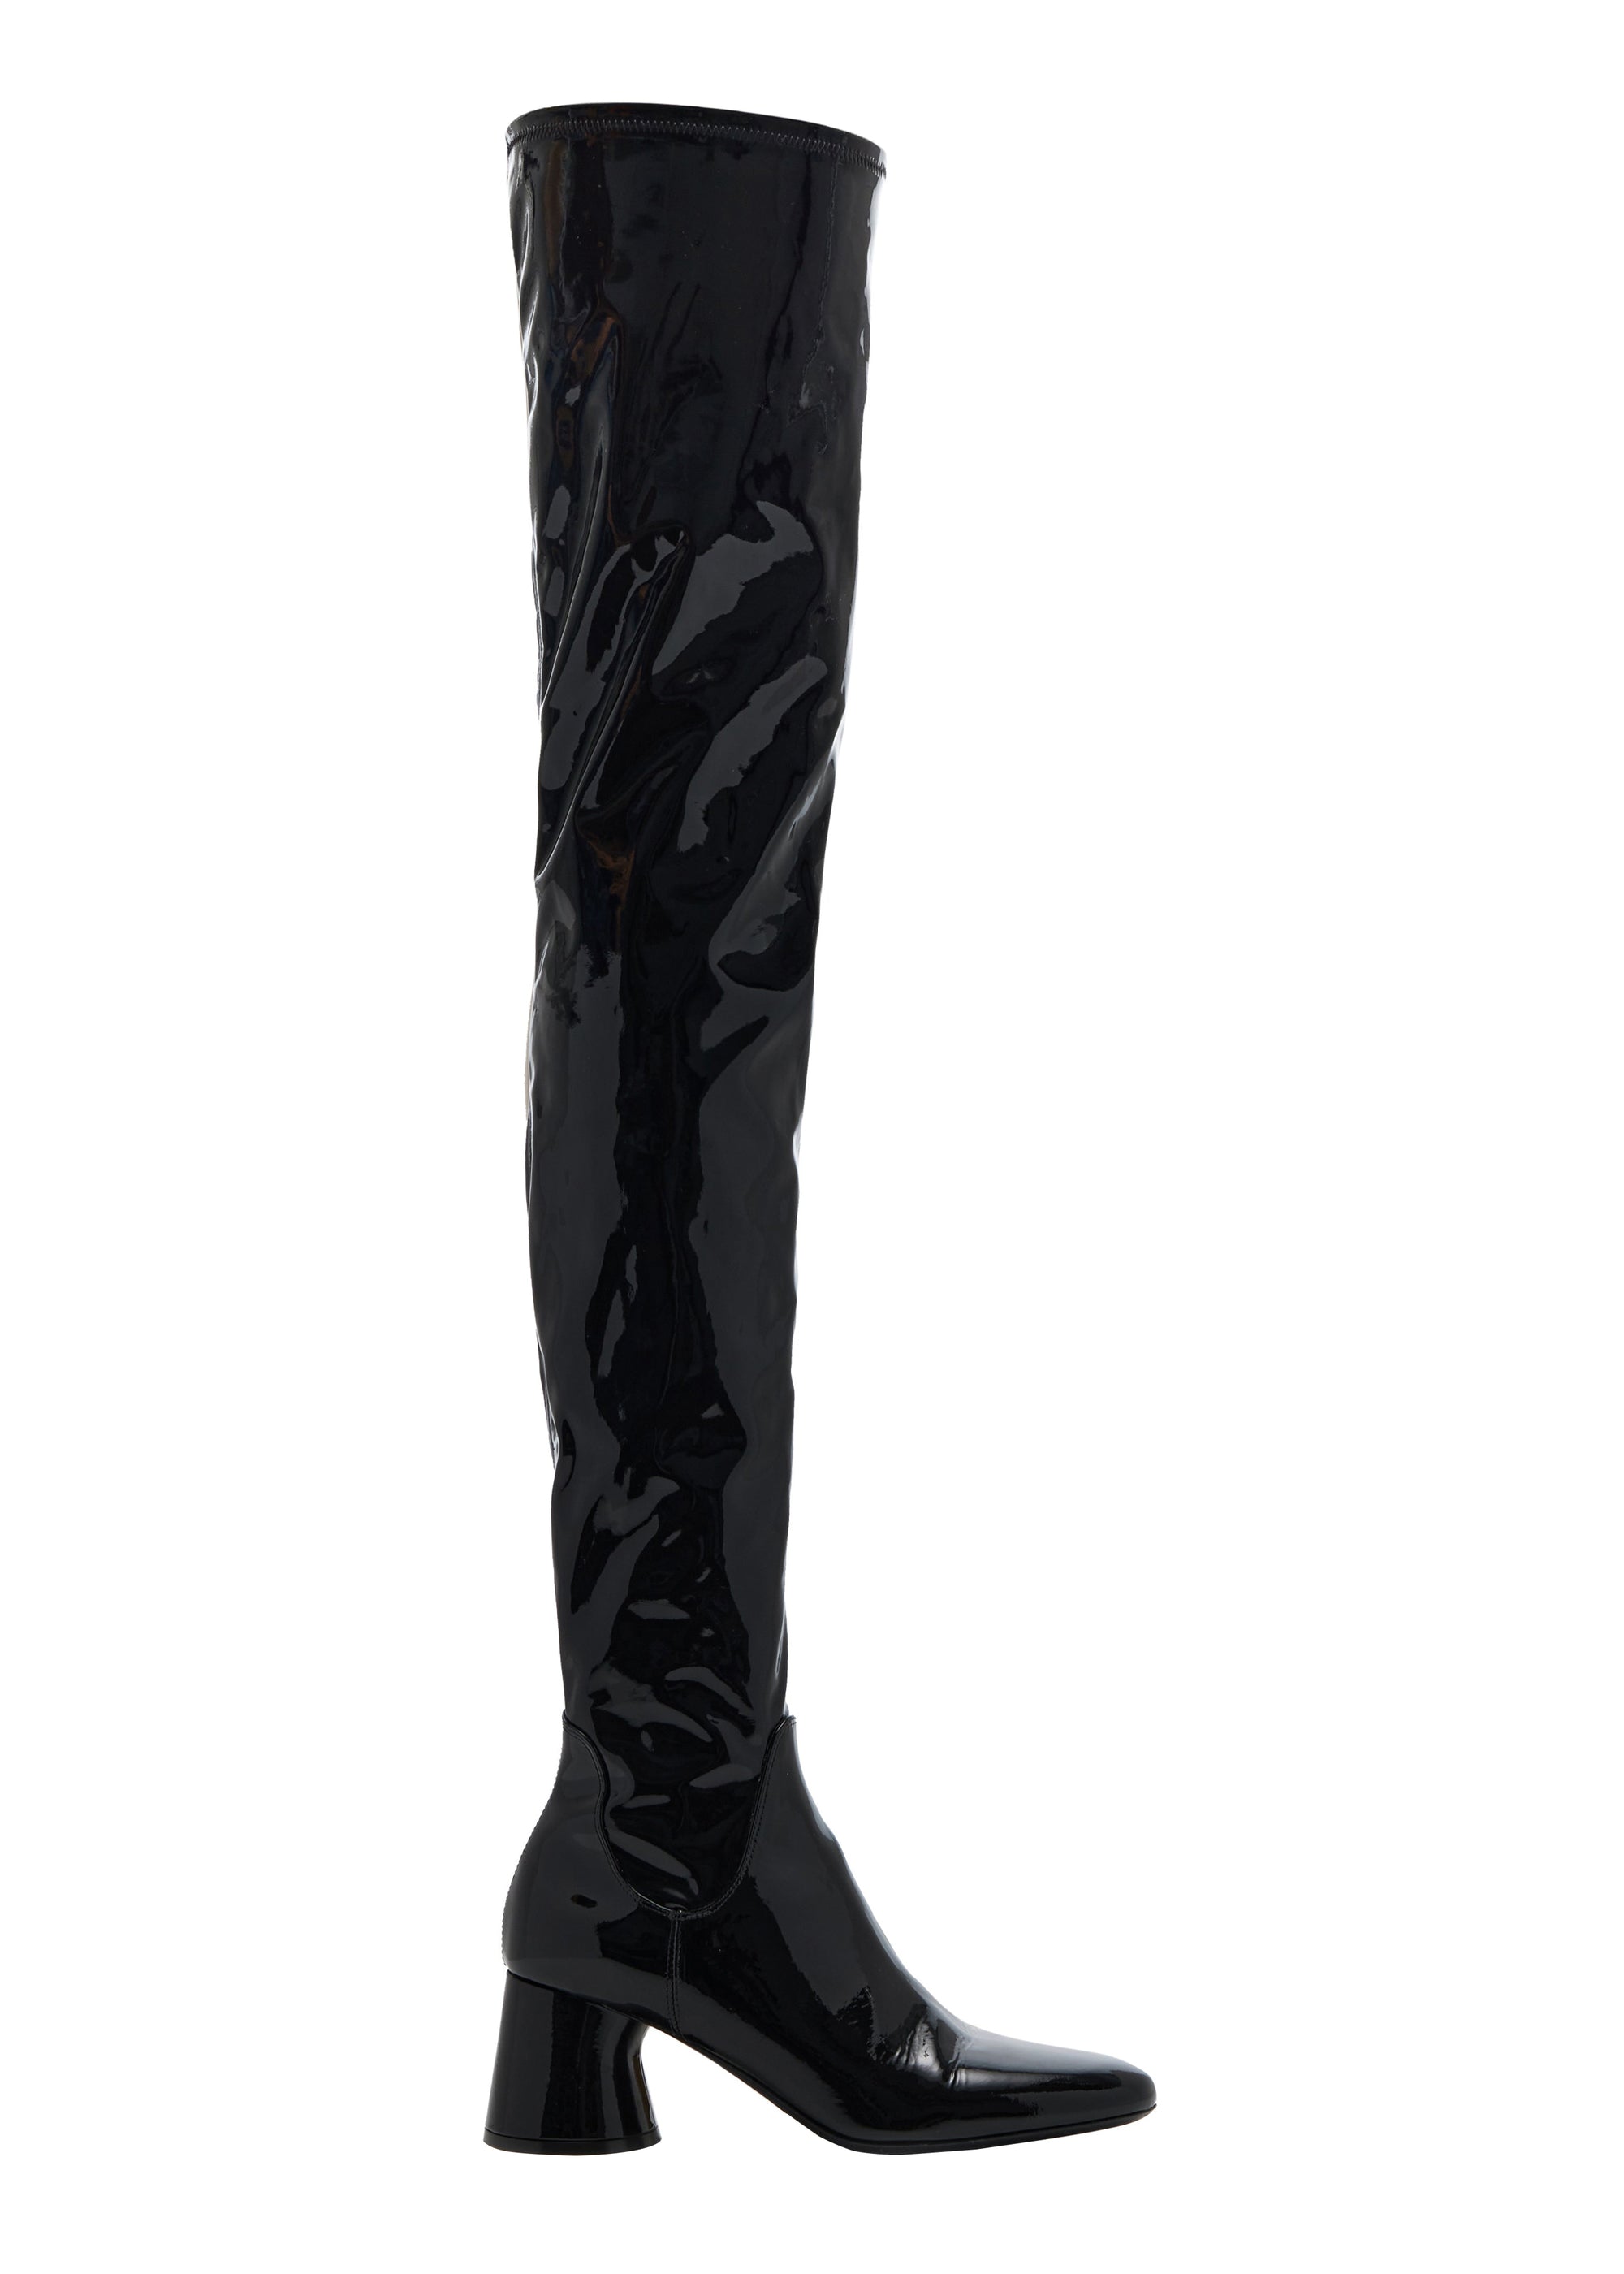 Wythe over-the-knee boot in leather - Black